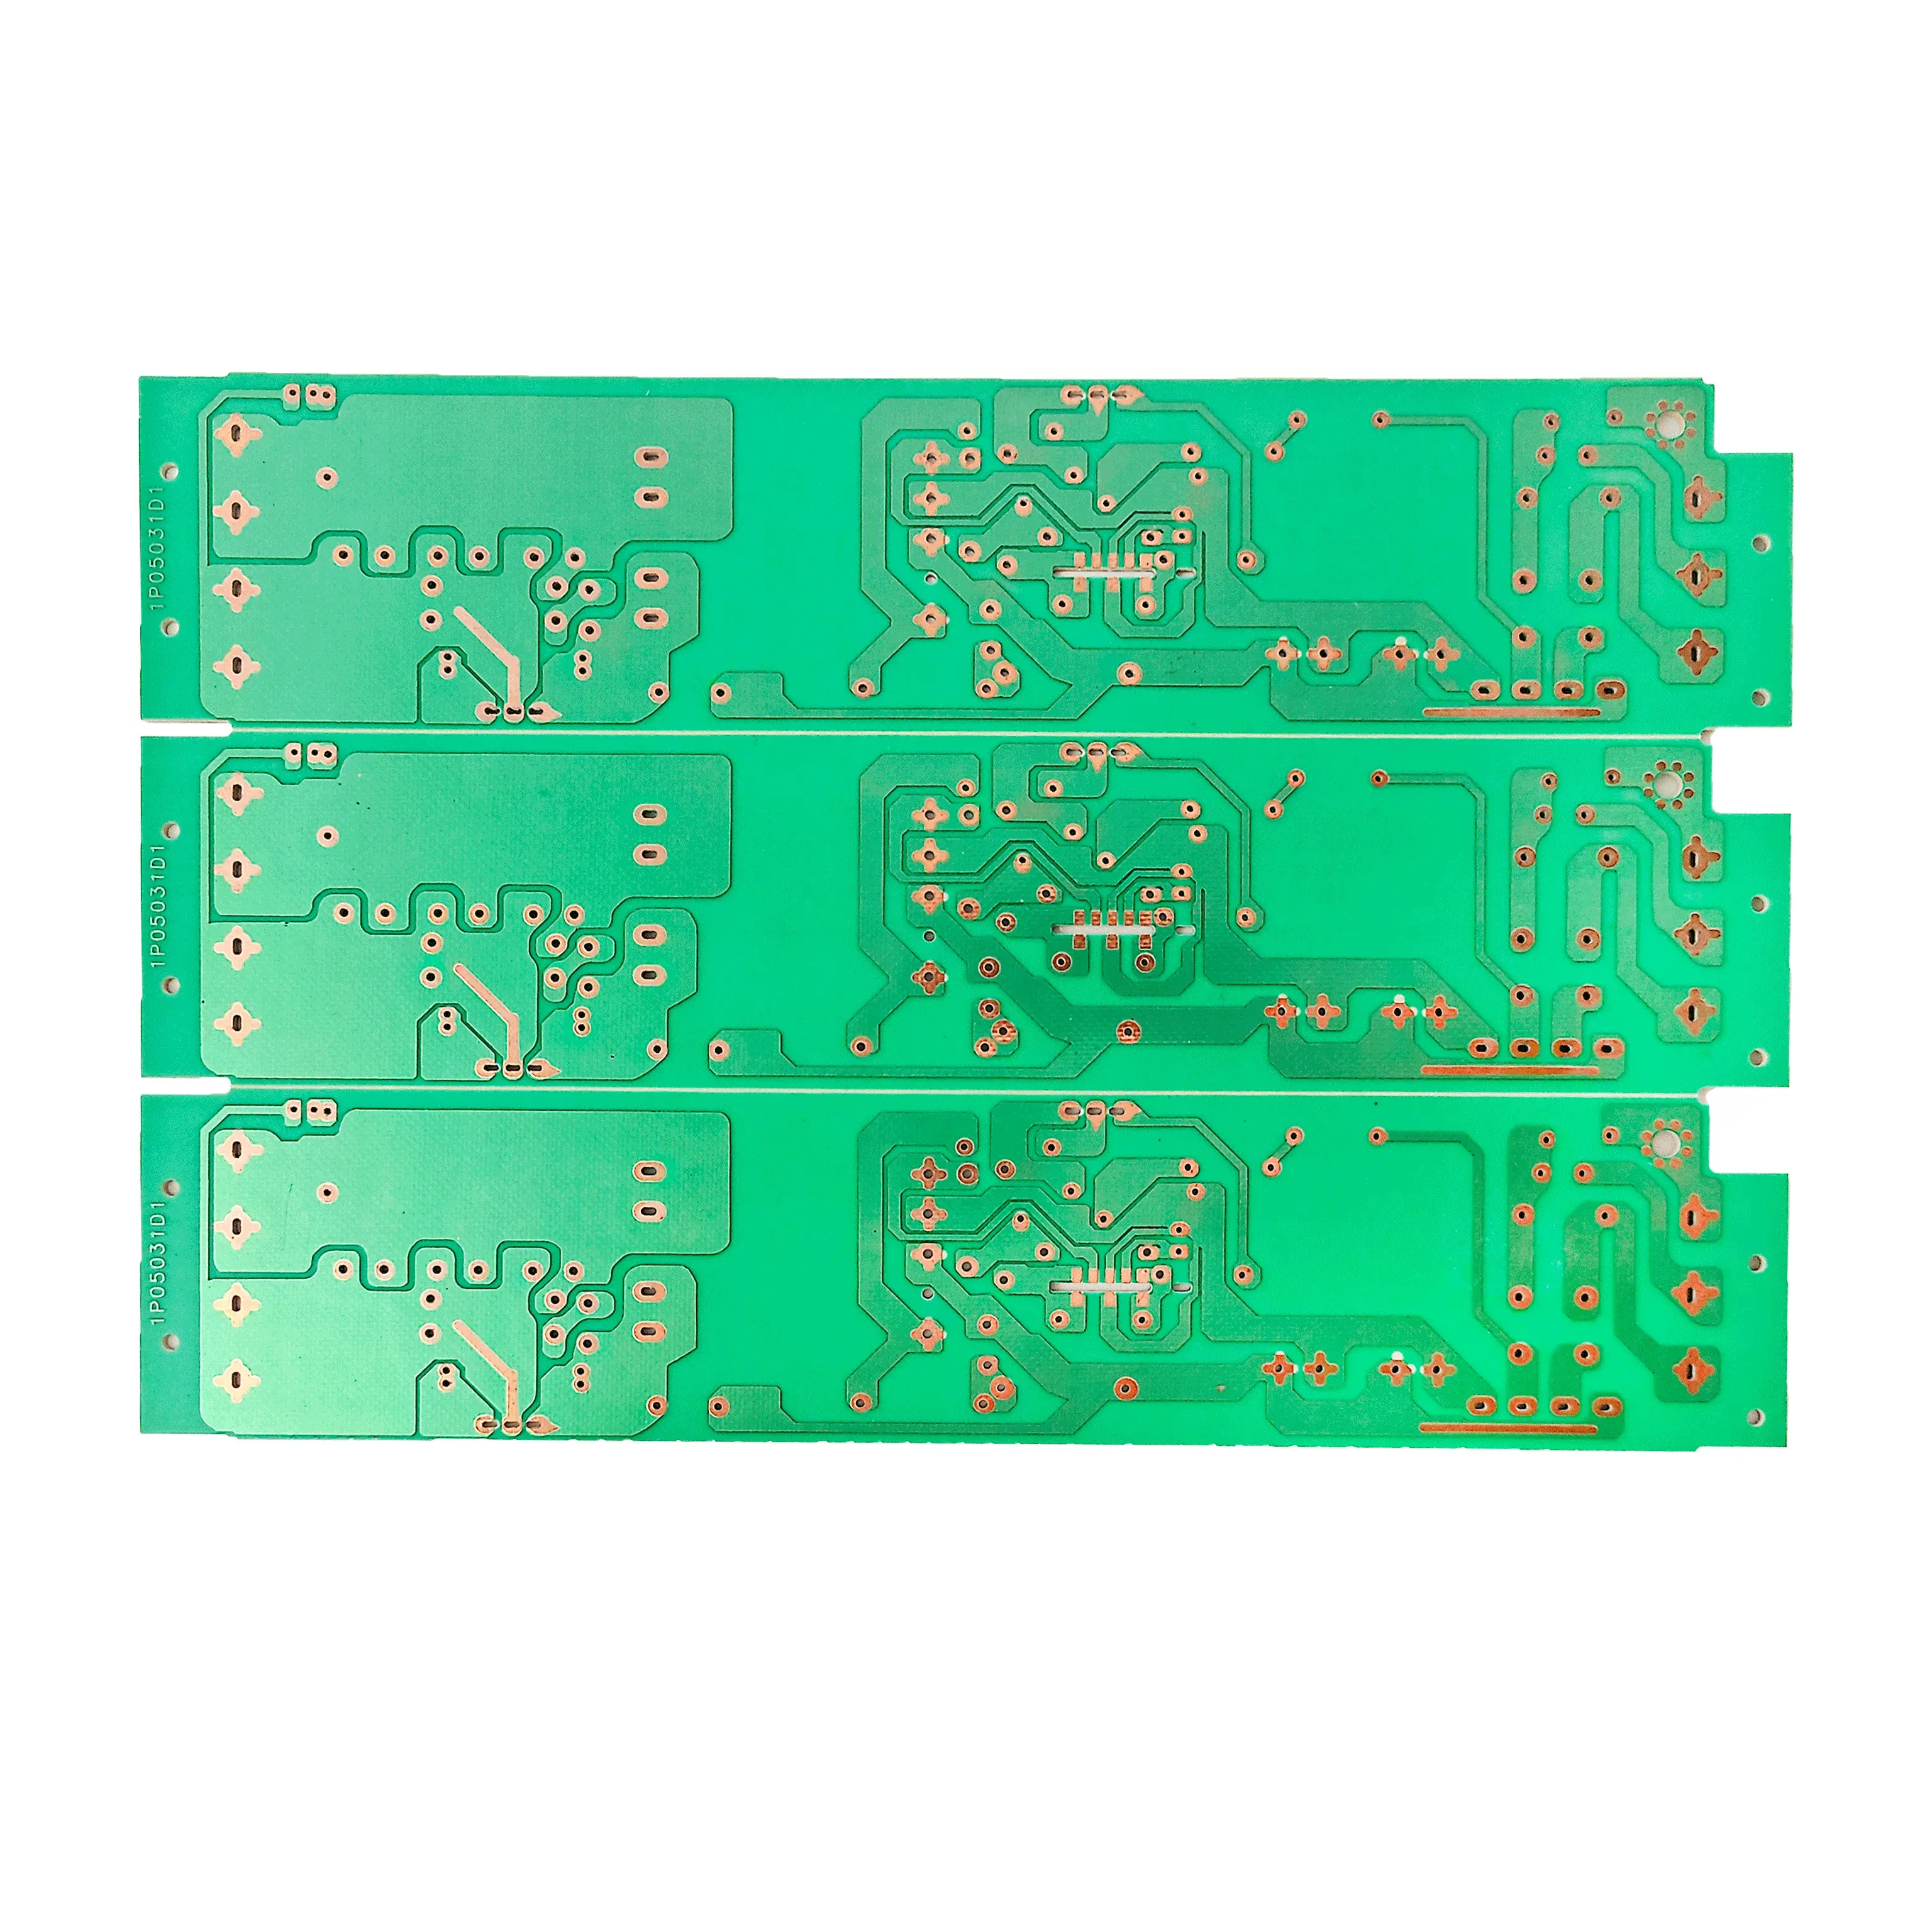 OEM Mobile 22F Semi-Fiberglass CEM-1 power bank circuit board Single-Sided PCB 94V0 Charger Control for Efficient Charging